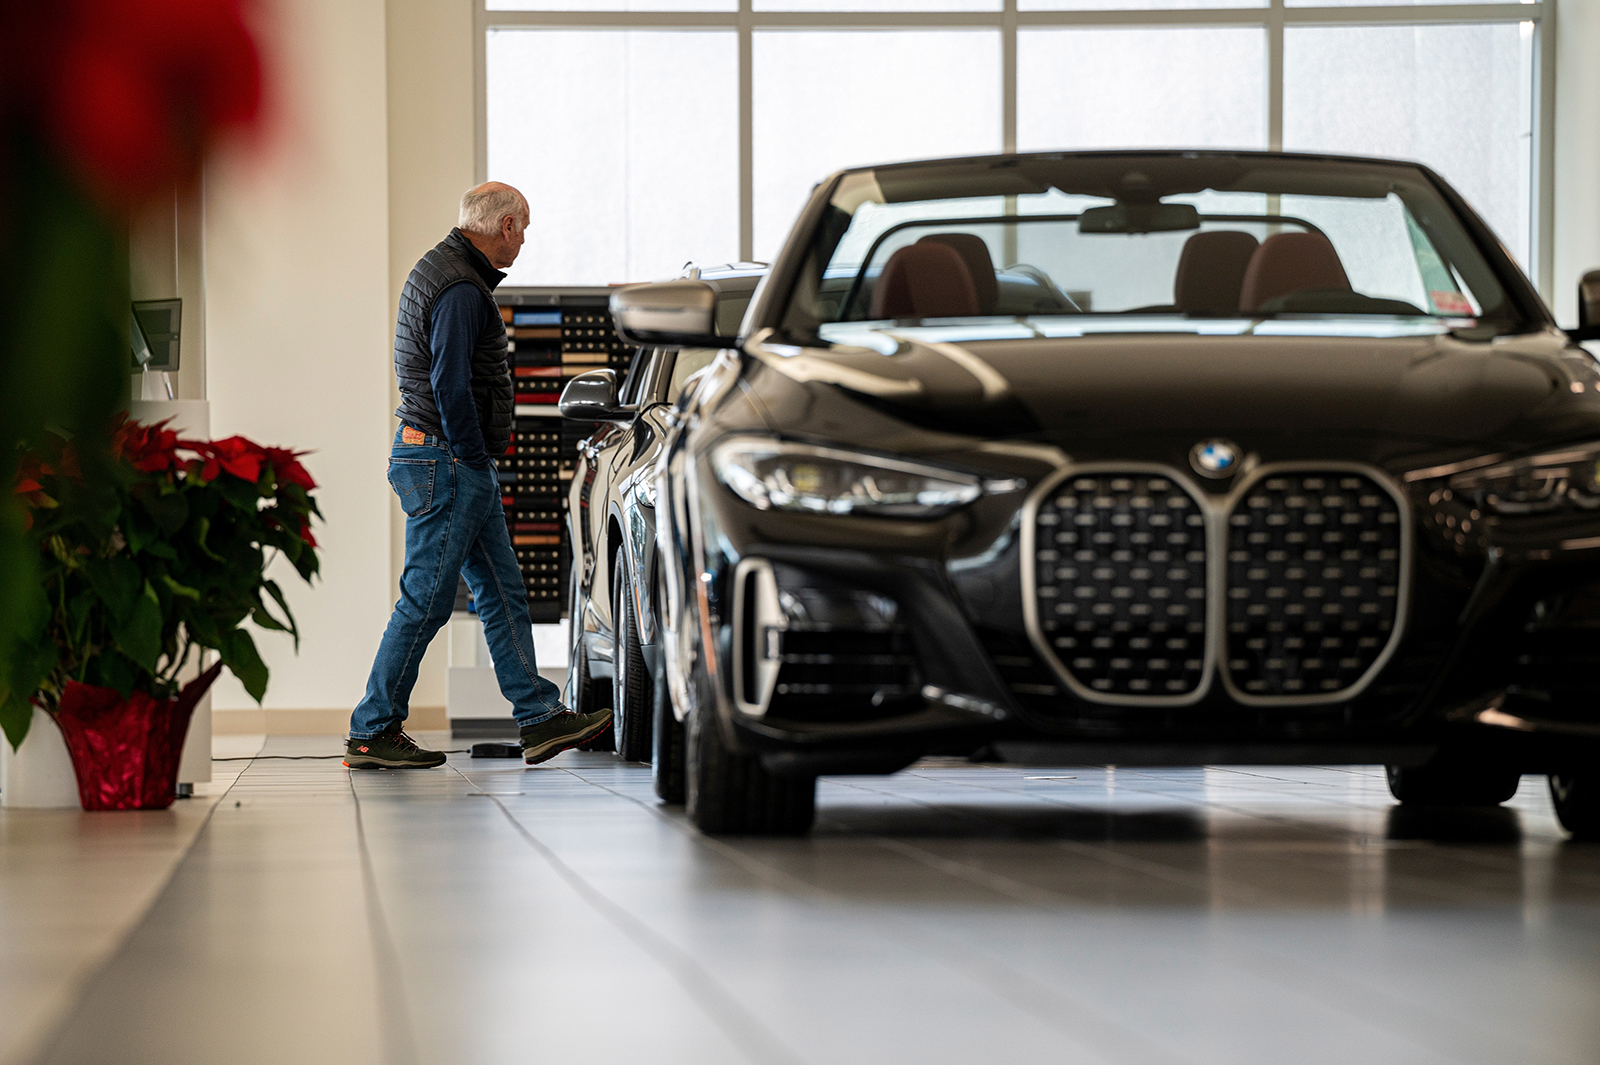 A customer looks at a vehicle at a BMW dealership in Mountain View, California, on December 14.